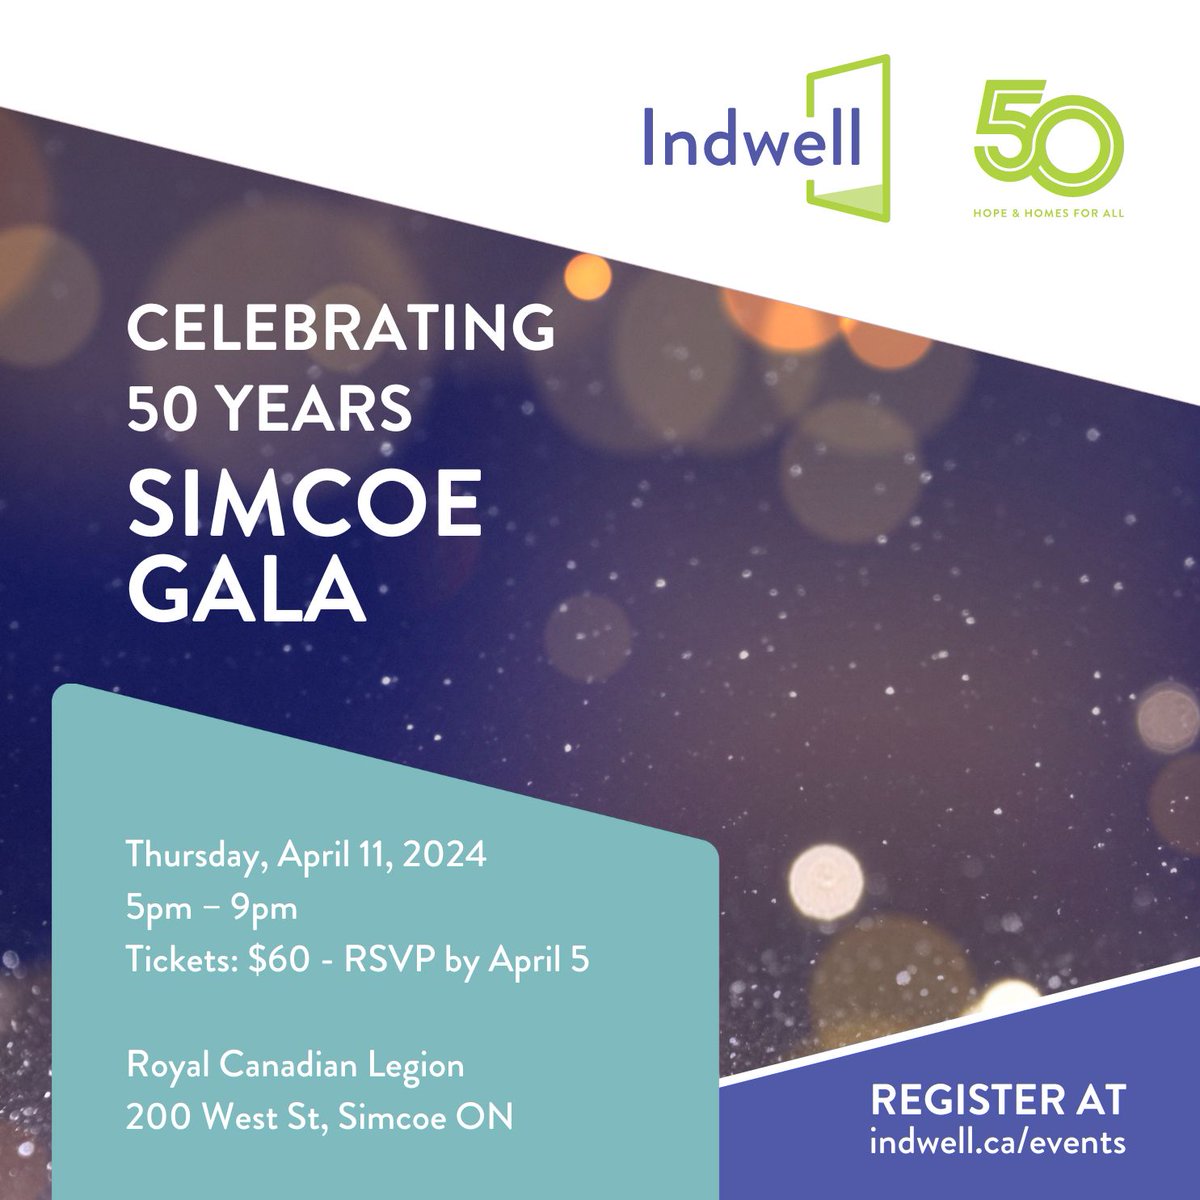 Simcoe! We can't wait to see you at our 50th Anniversary Celebration Gala - we're so excited that we're extending our RSVP deadline to Monday, April 8. Come on out to support many more years of hope and homes for all in Haldimand-Norfolk. Tickets here: loom.ly/mWjmo3s